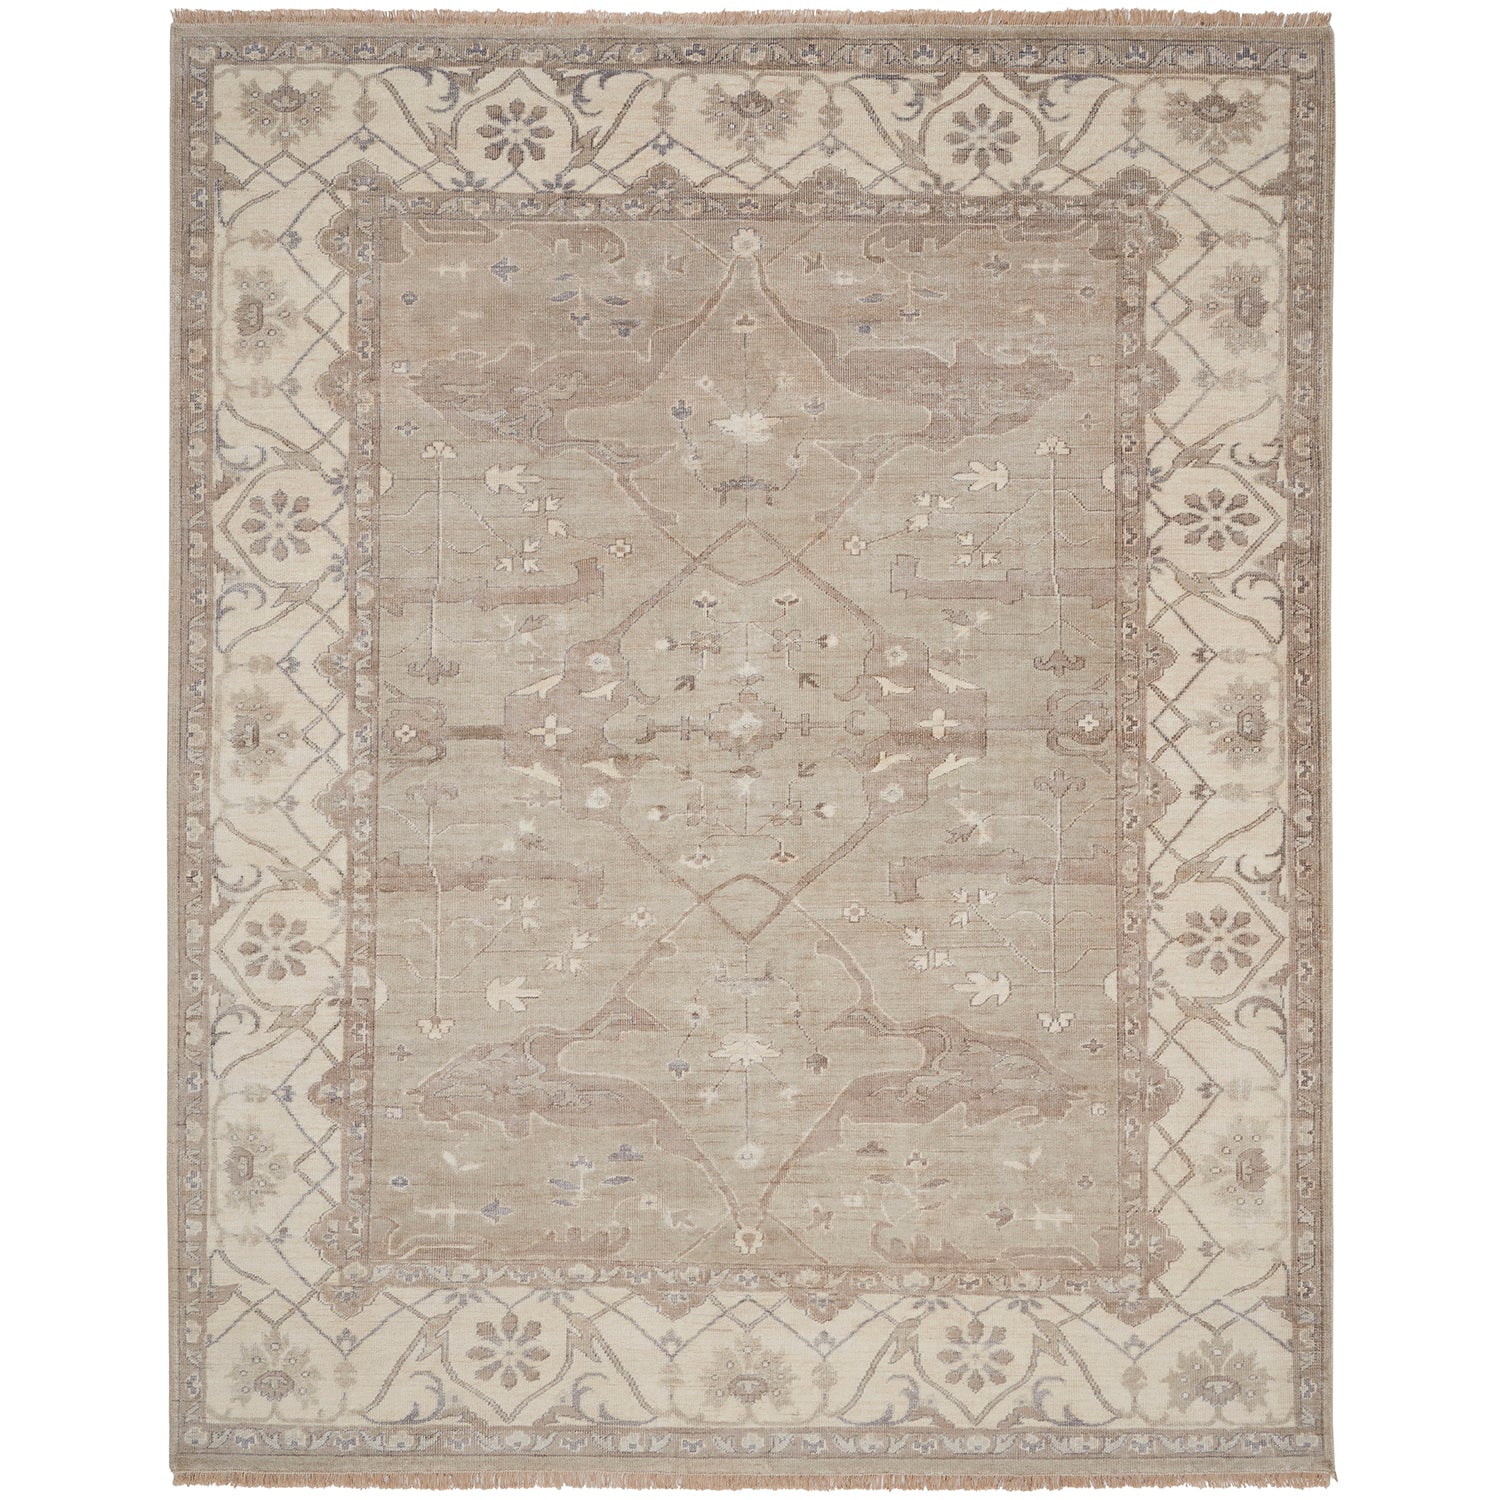 Ornate handwoven rug featuring intricate patterns and traditional influences.